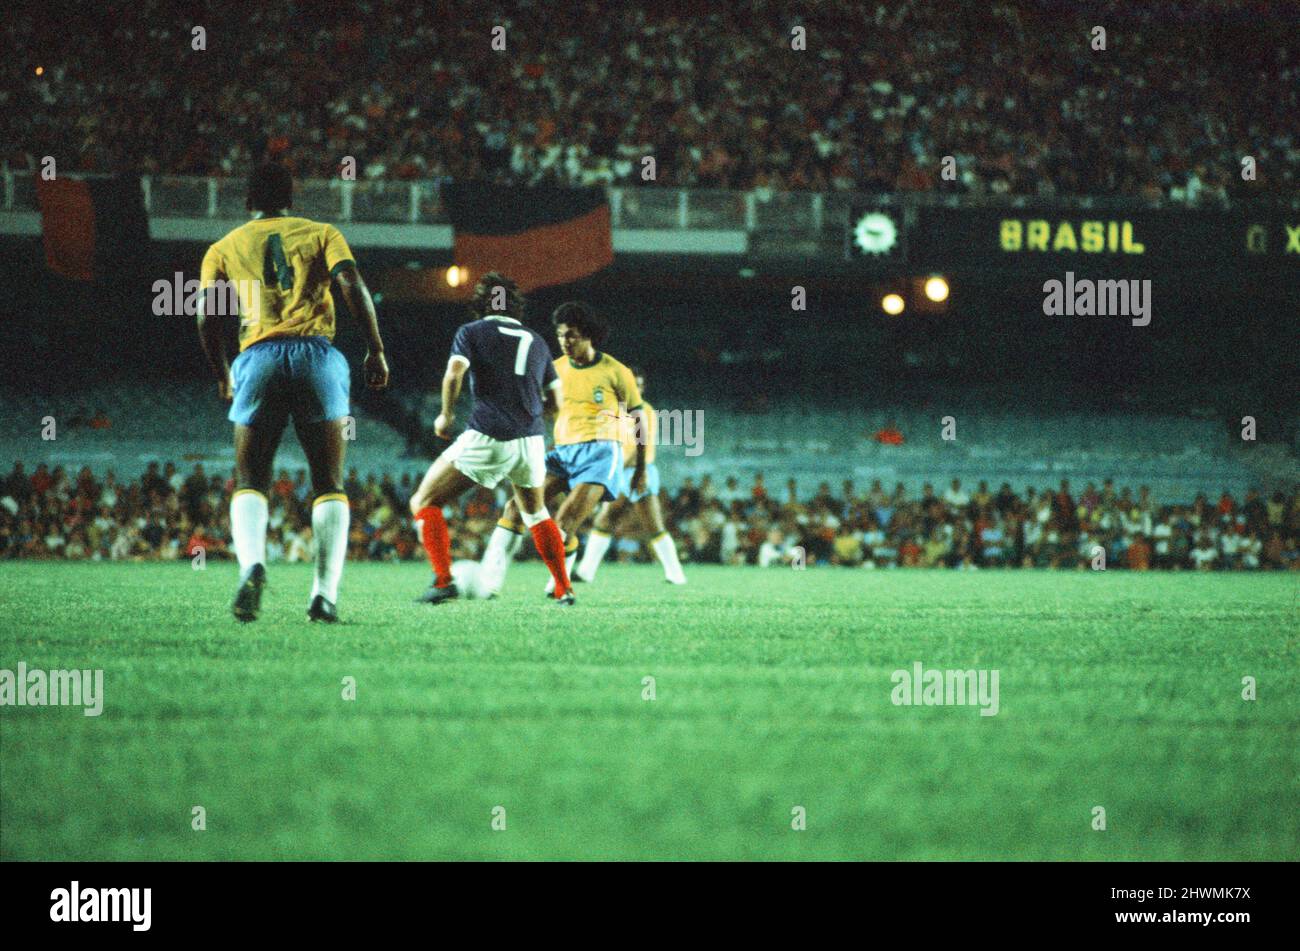 Brazil 1-0 Scotland, 1972 Brazil Independence Cup, final stage, Group A match at the Estadio do Maracana, Rio de Janeiro, Brazil, Wednesday 5th July 1972. Pictured, Action during the match. Stock Photo